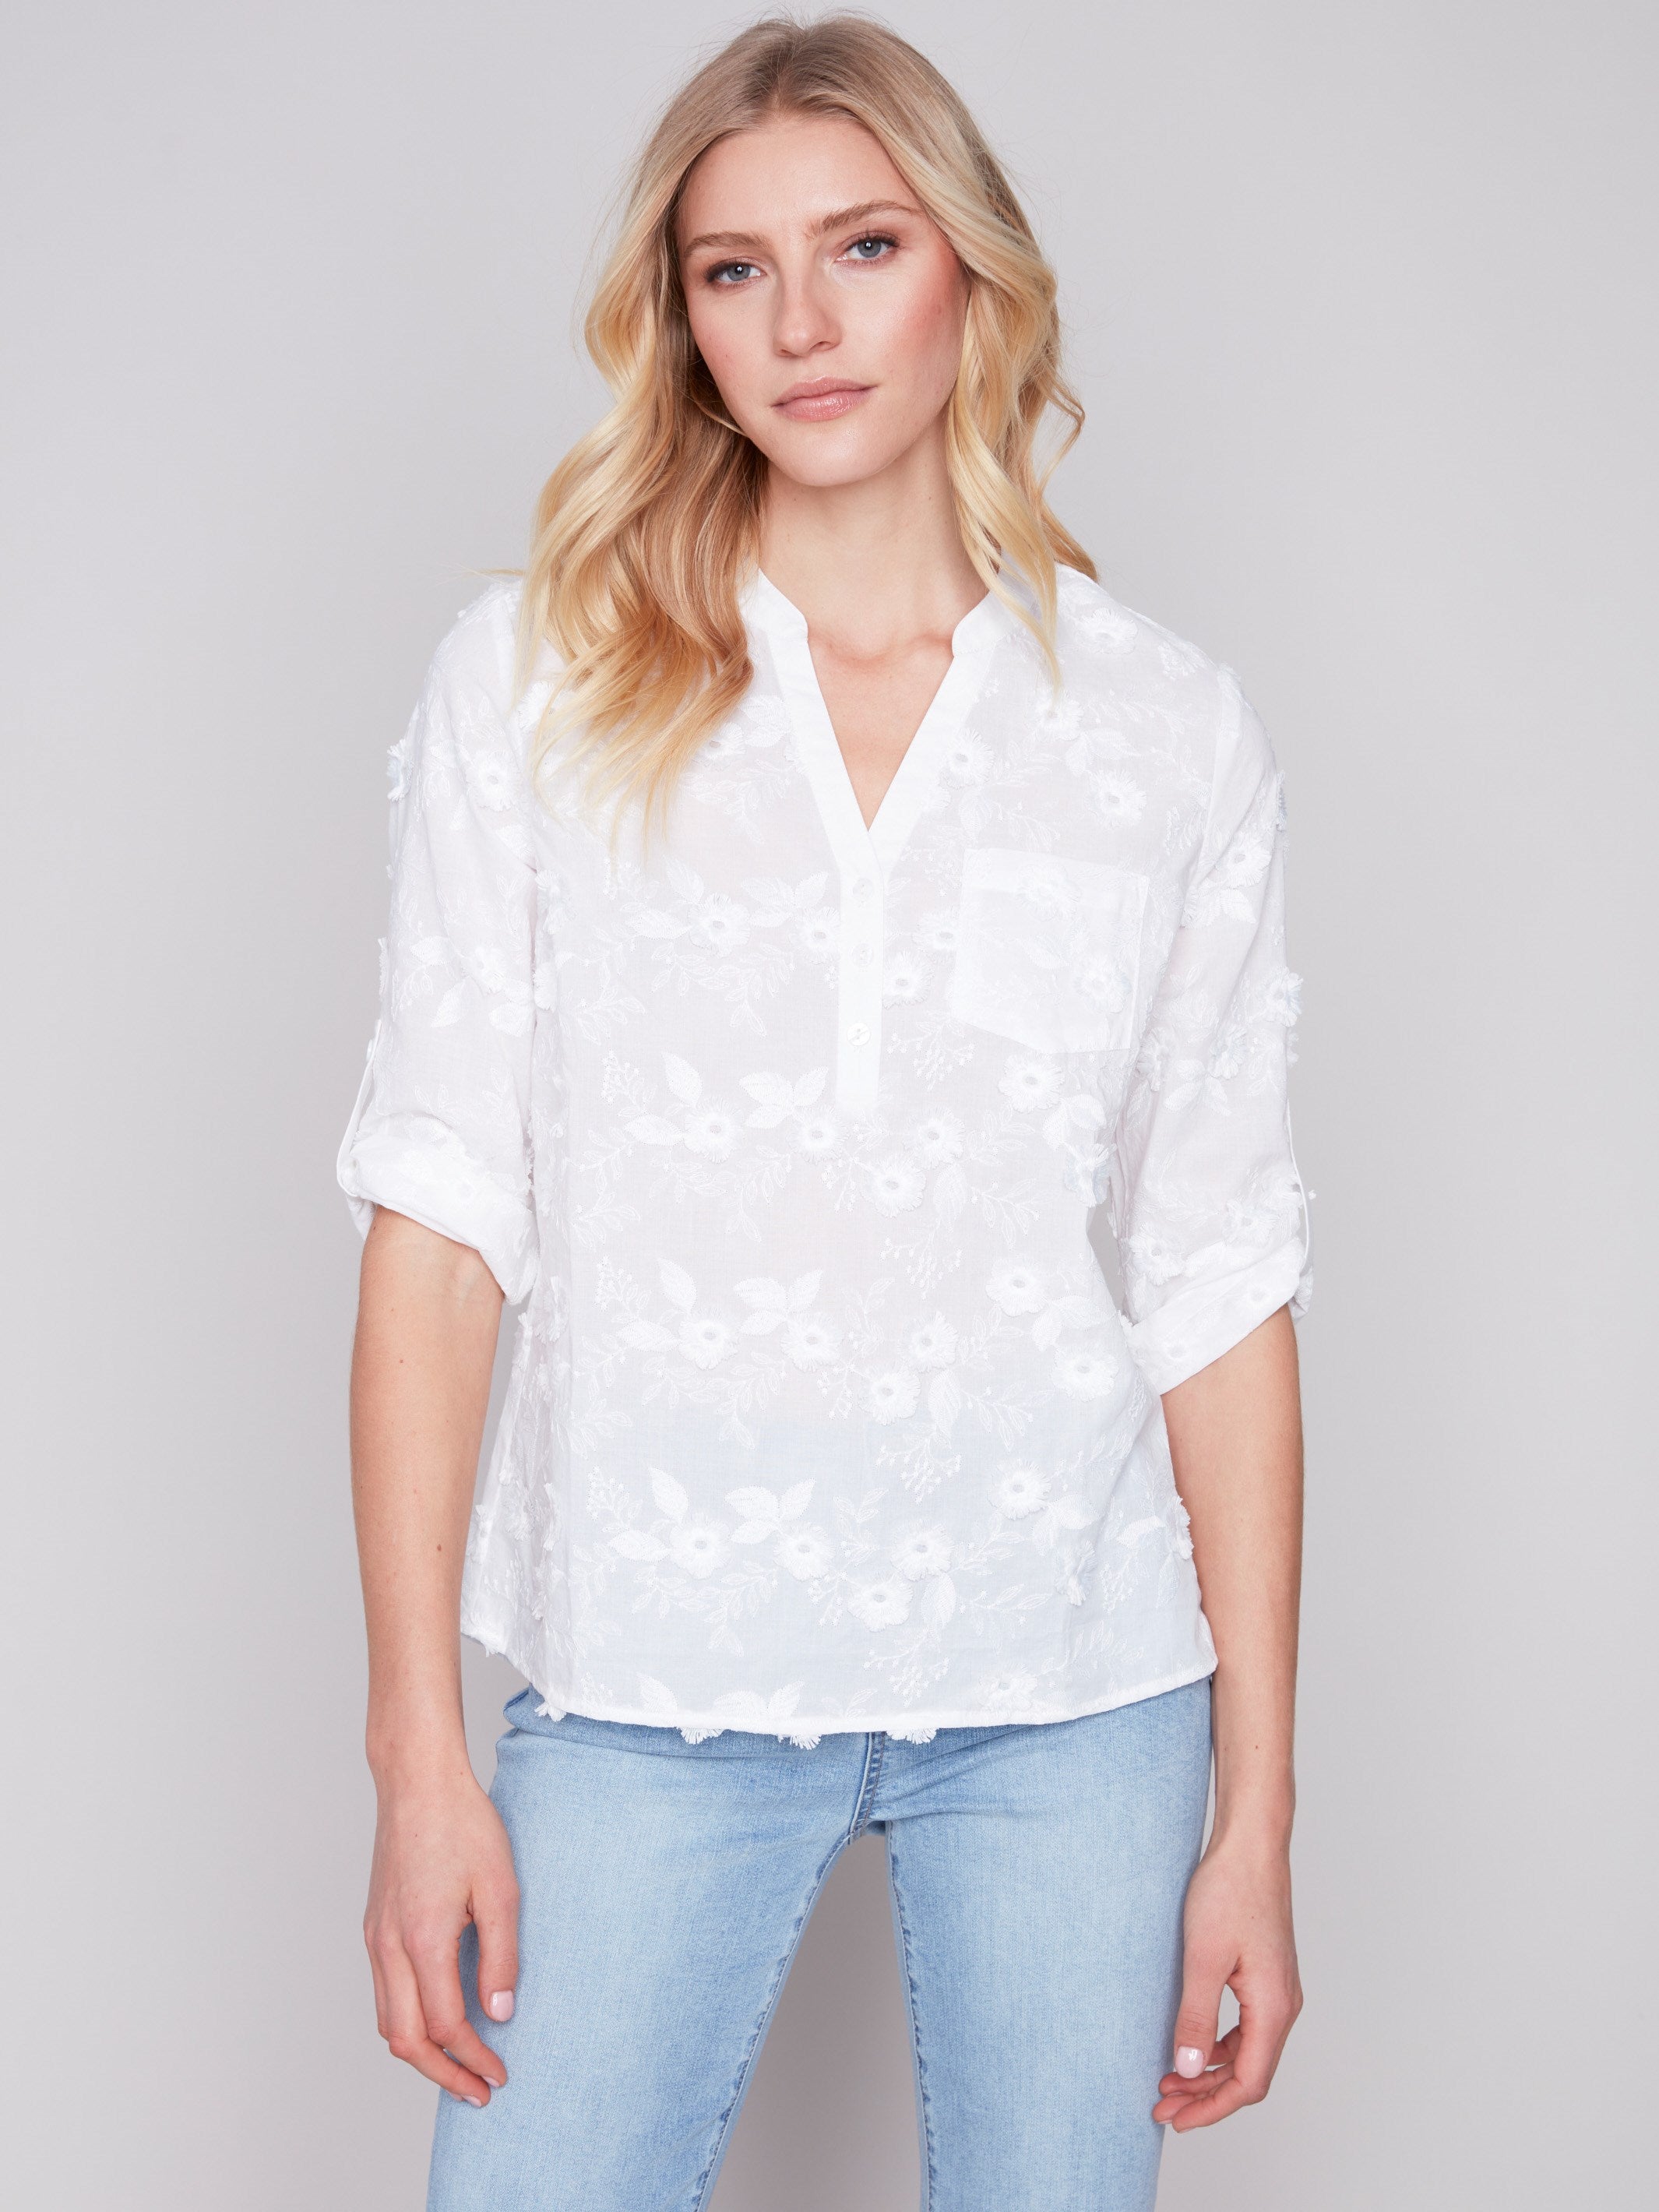 Charlie B Half-Button Embroidered Cotton Blouse - White - Image 3